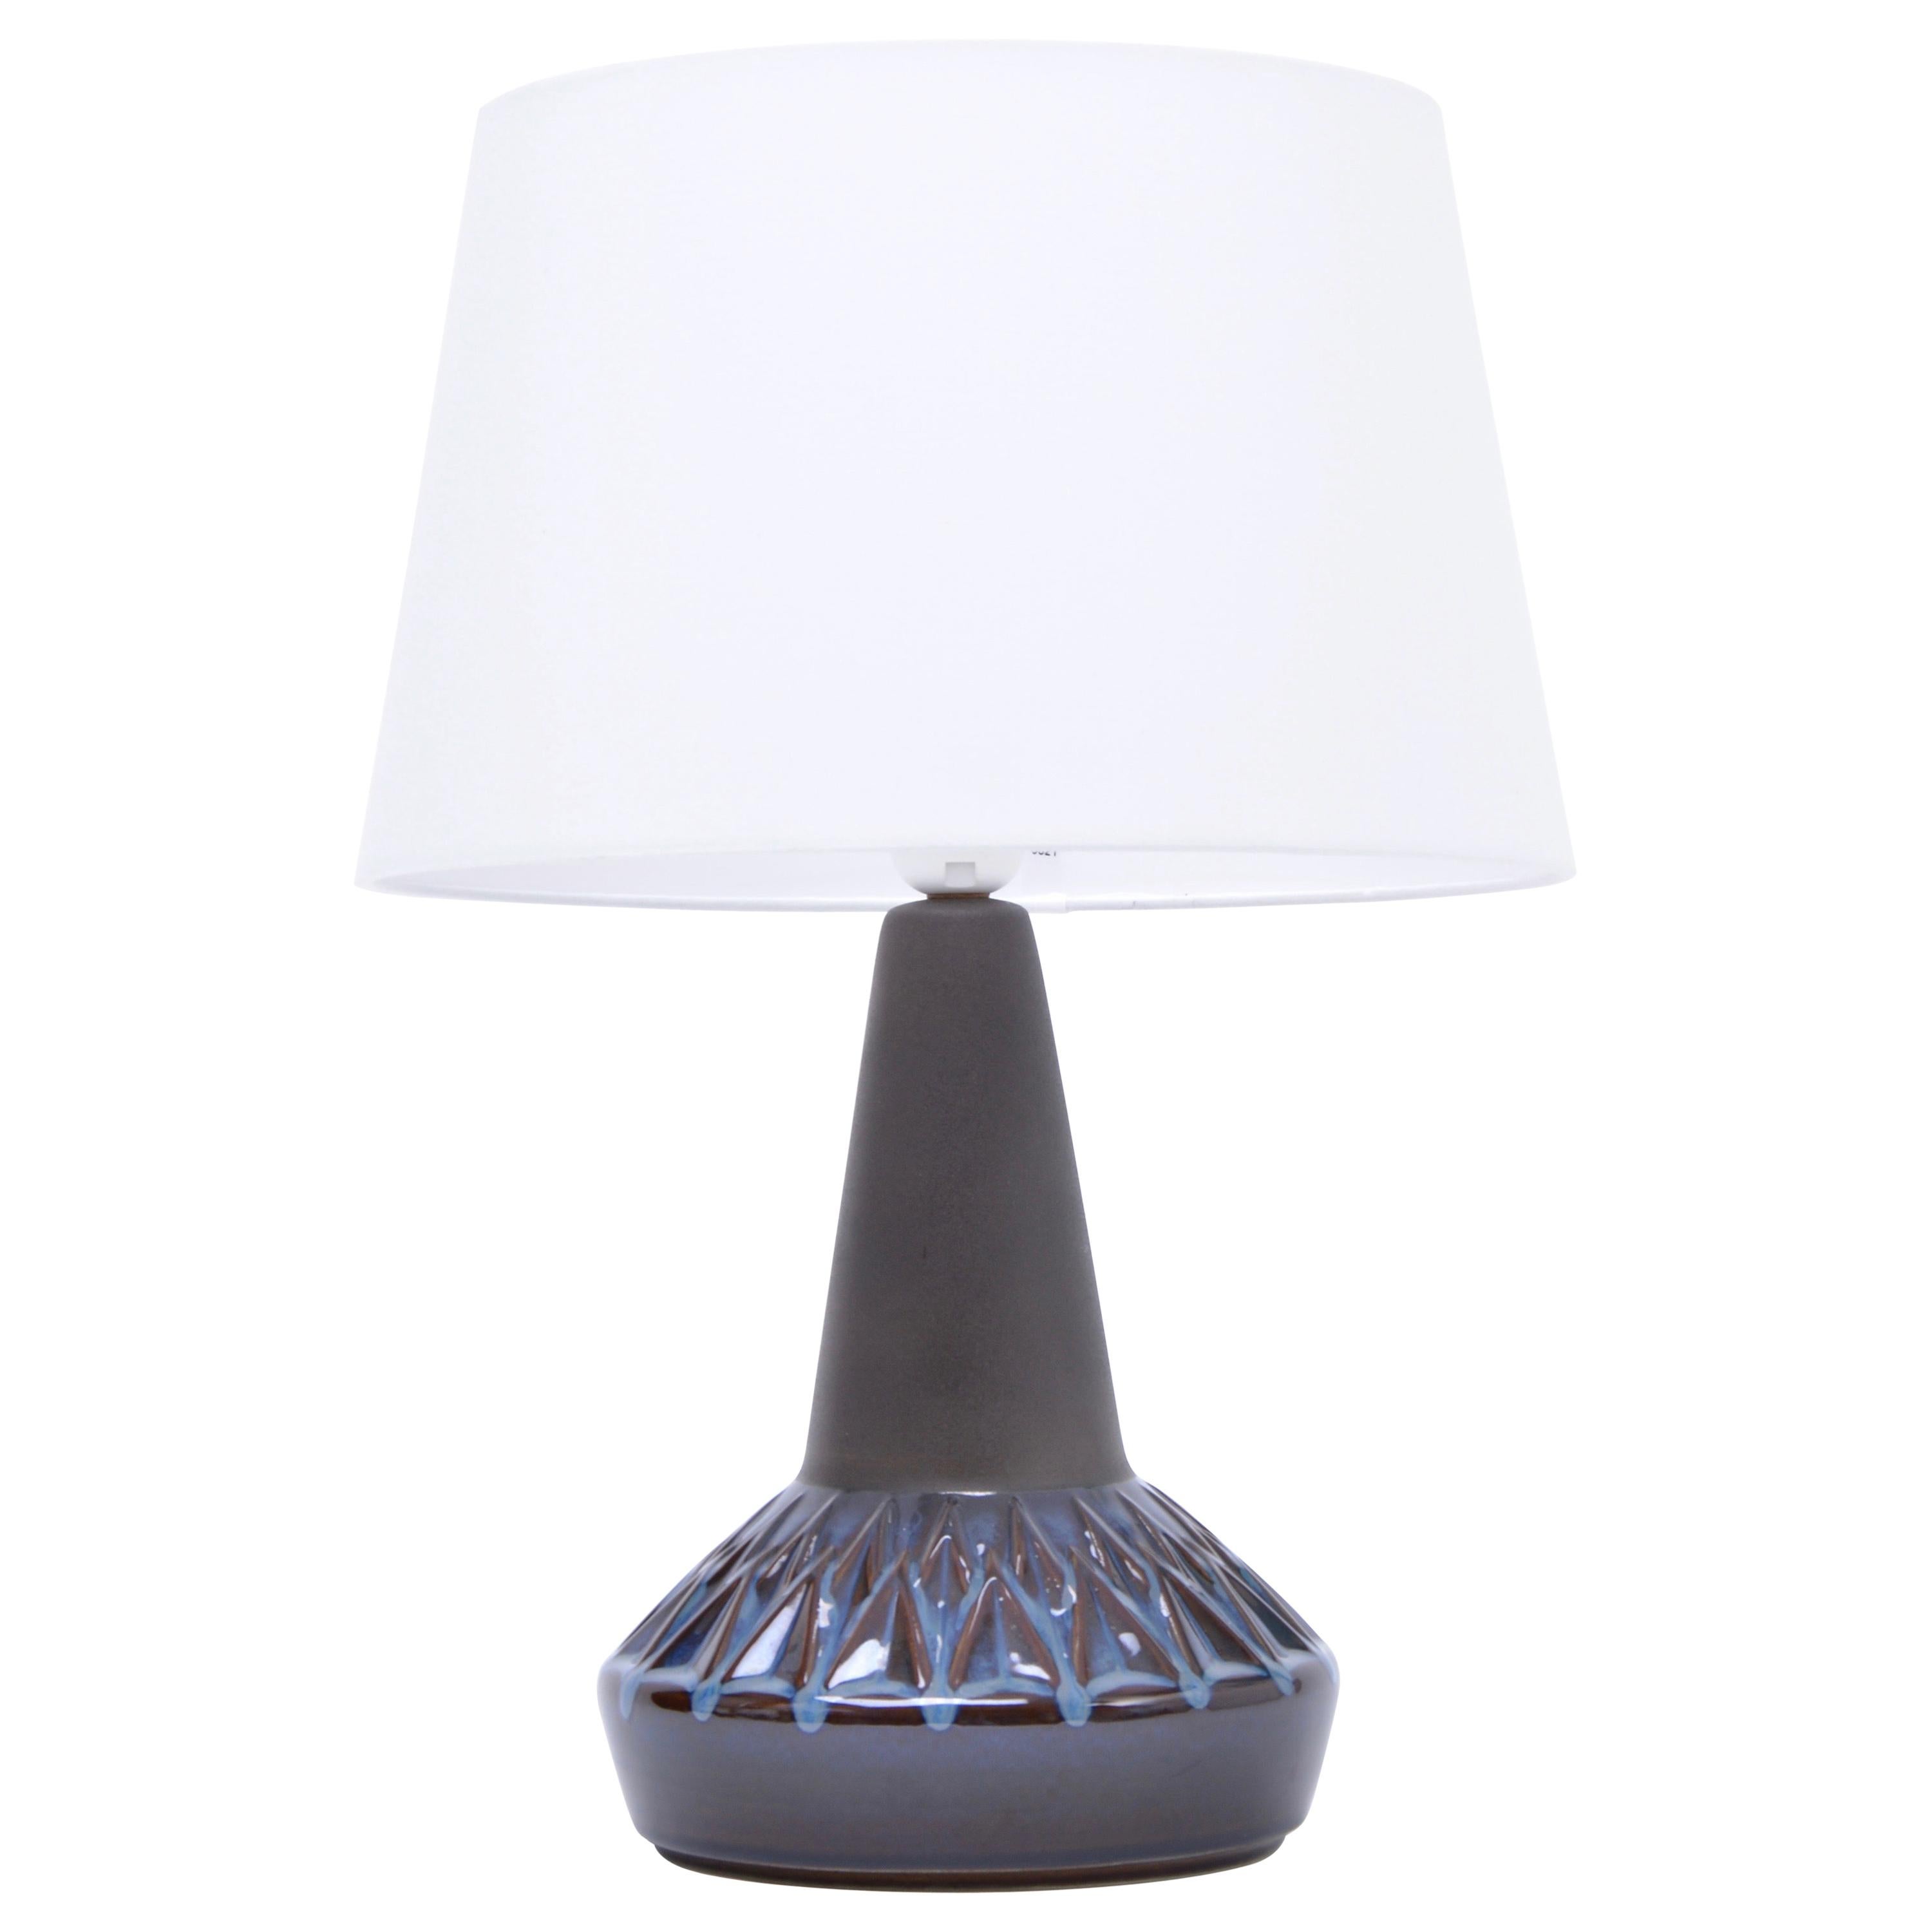 Mid-Century Modern table lamp model 1058 by Soholm